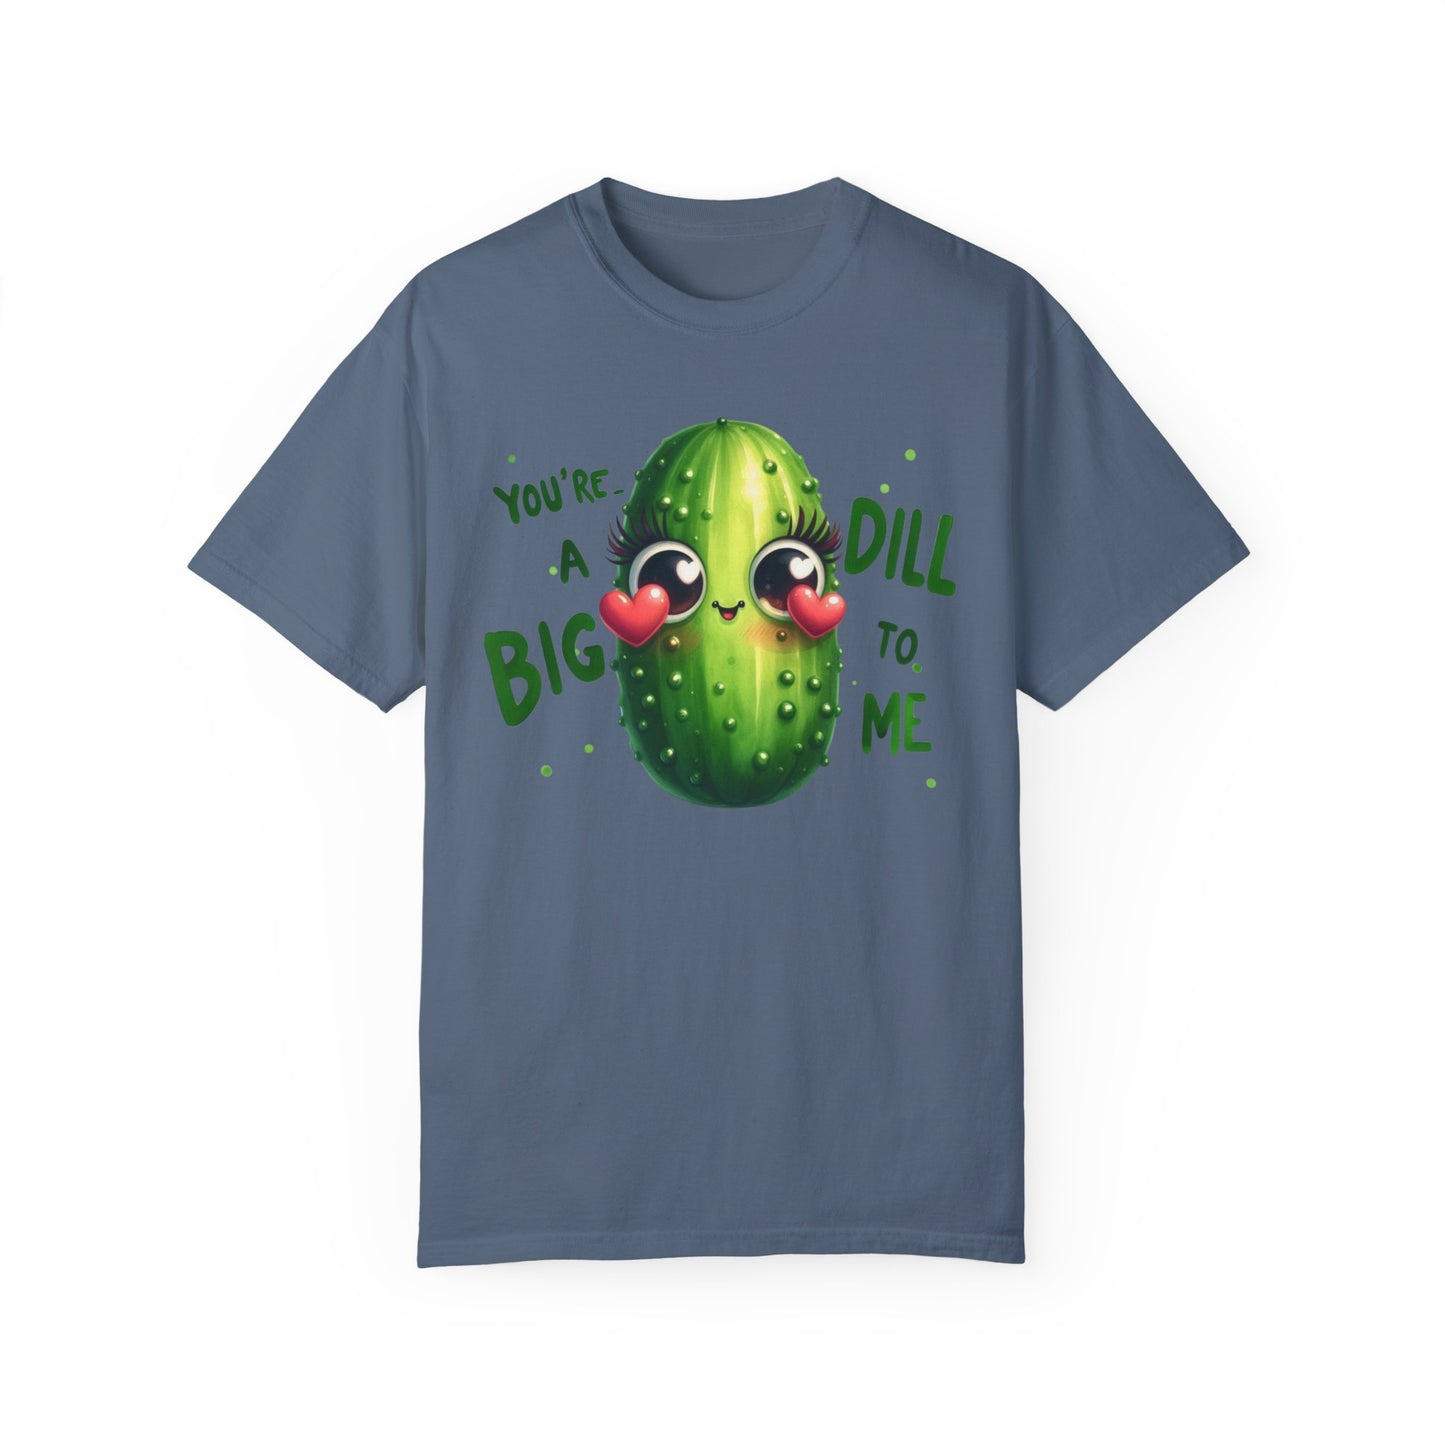 You're a Big Dill to Me